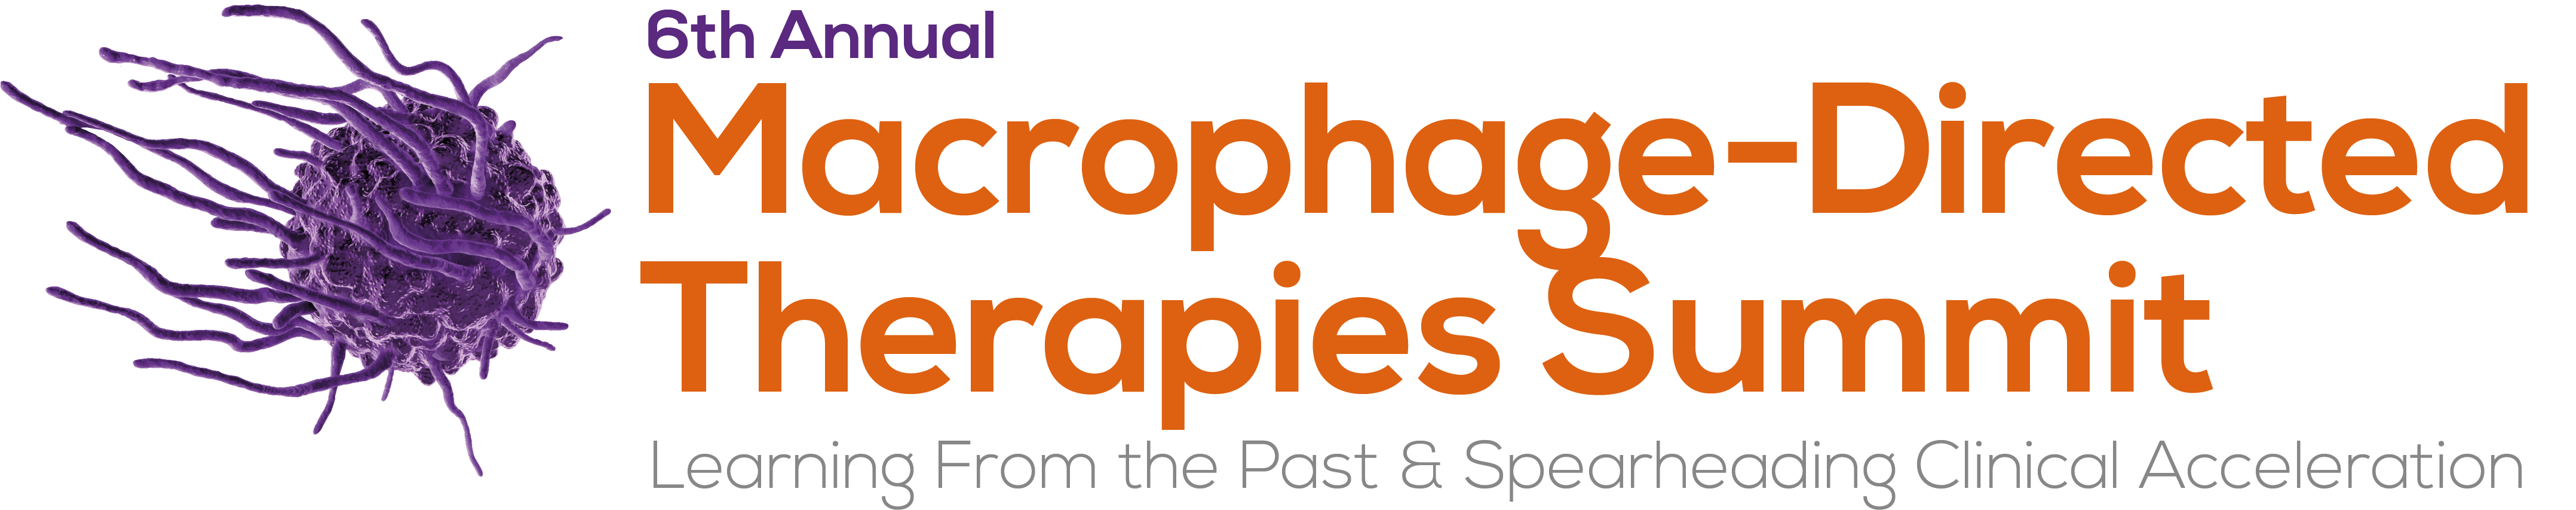 6th Macrophage-Directed Therapies Summit - Logo